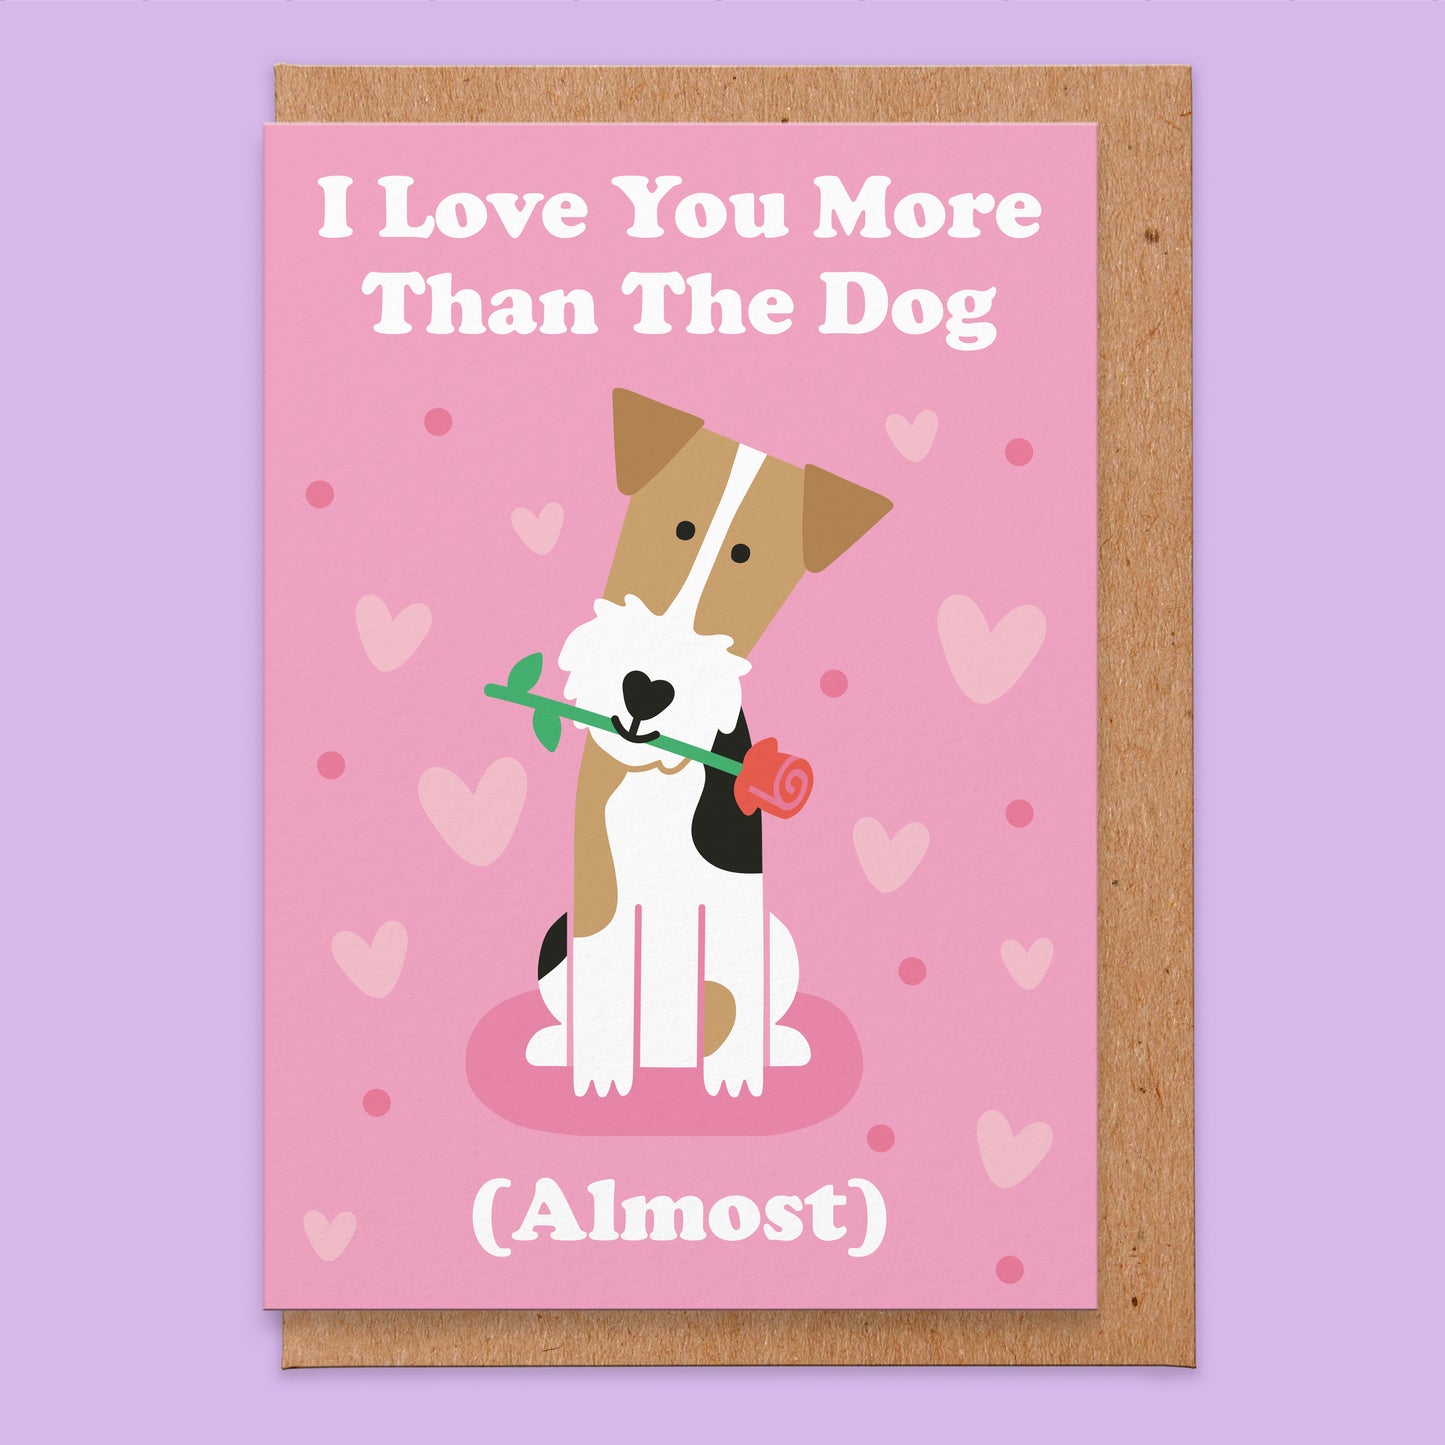 Love card that has an illustration of a wire fox terrier dog with a rose in it's mouth and the words say I love you more than the dog (almost).